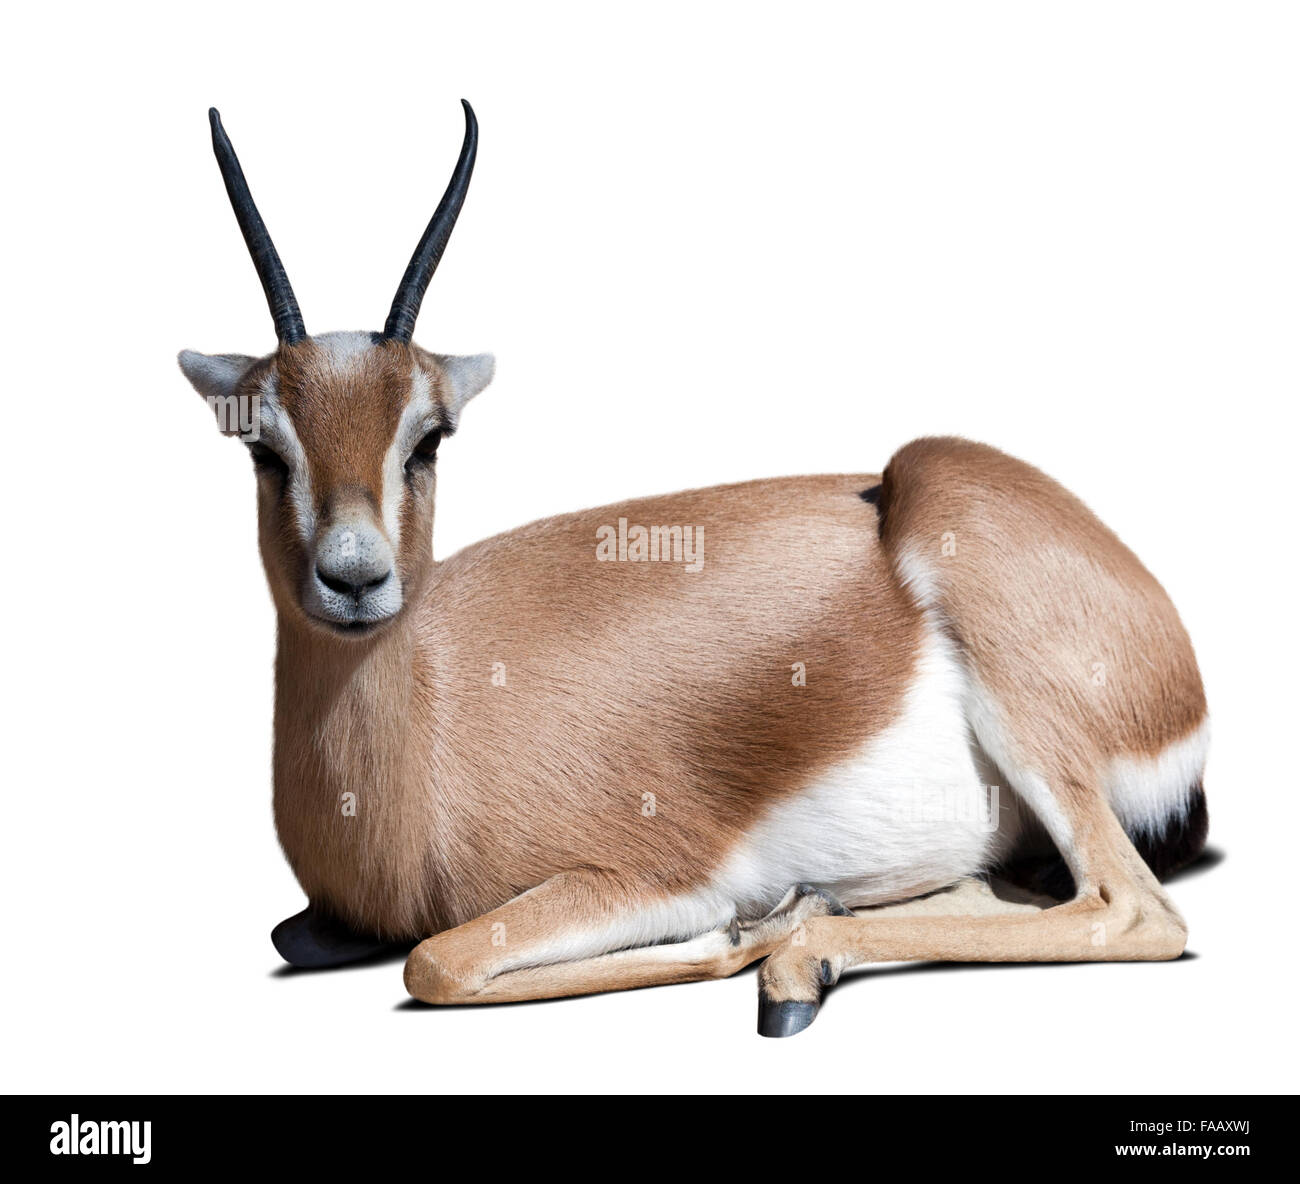 Sitting adult dorcas gazelle.  Isolated over white with shade Stock Photo